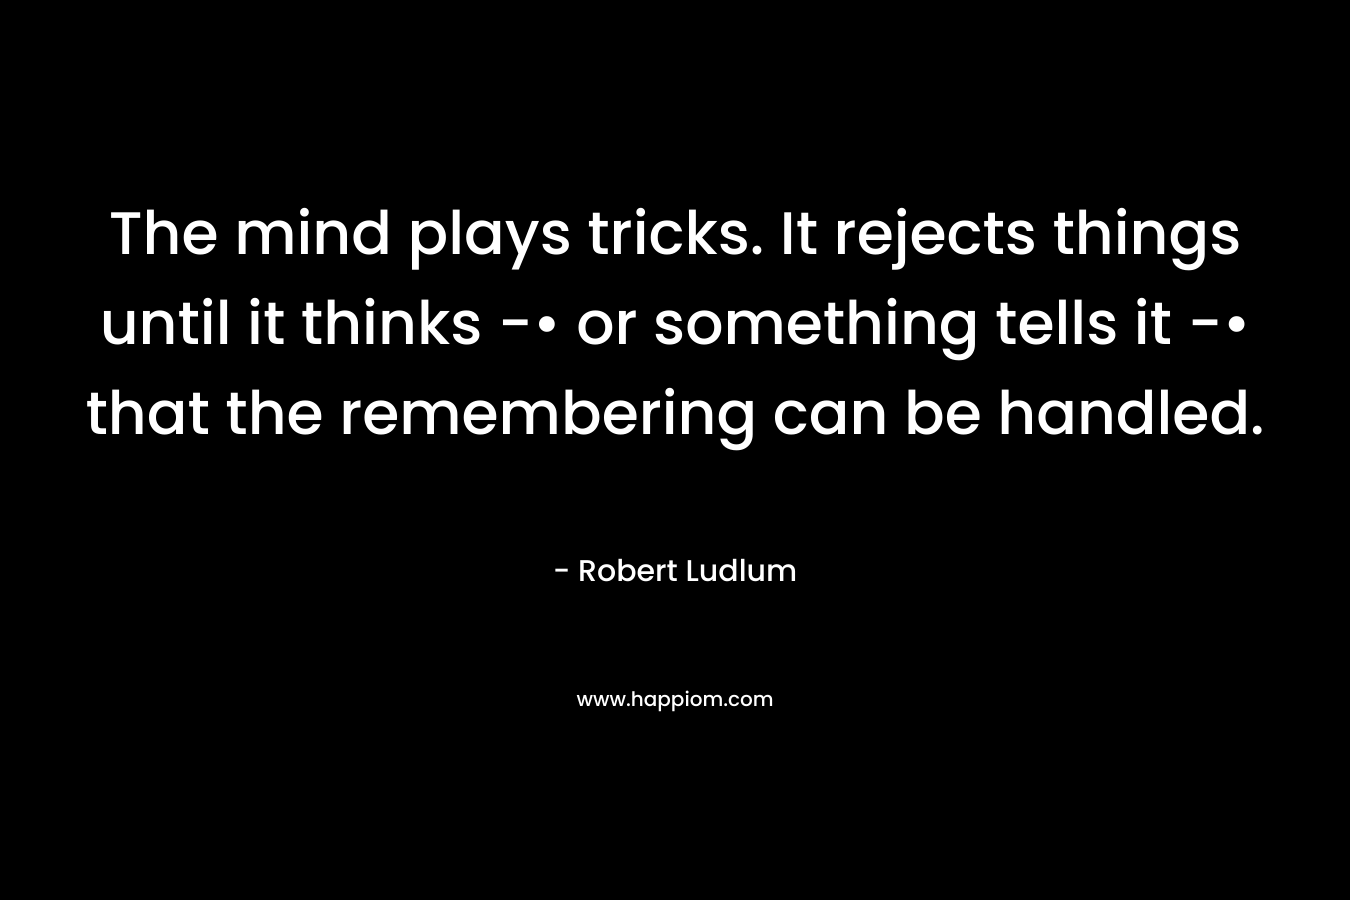 The mind plays tricks. It rejects things until it thinks -• or something tells it -• that the remembering can be handled. – Robert Ludlum